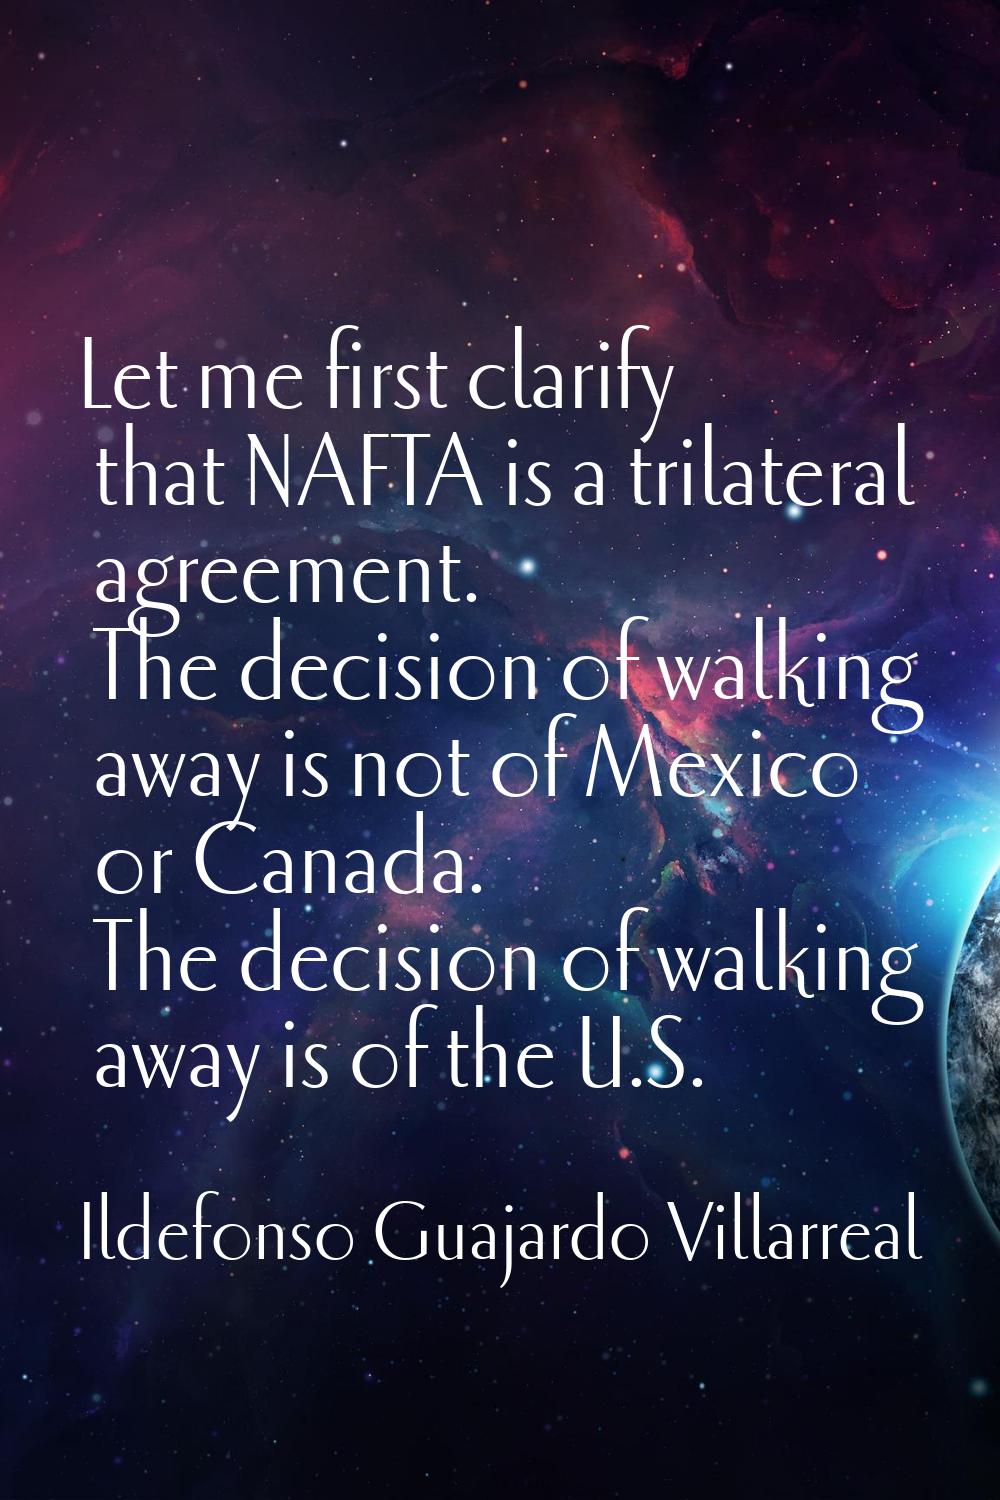 Let me first clarify that NAFTA is a trilateral agreement. The decision of walking away is not of M